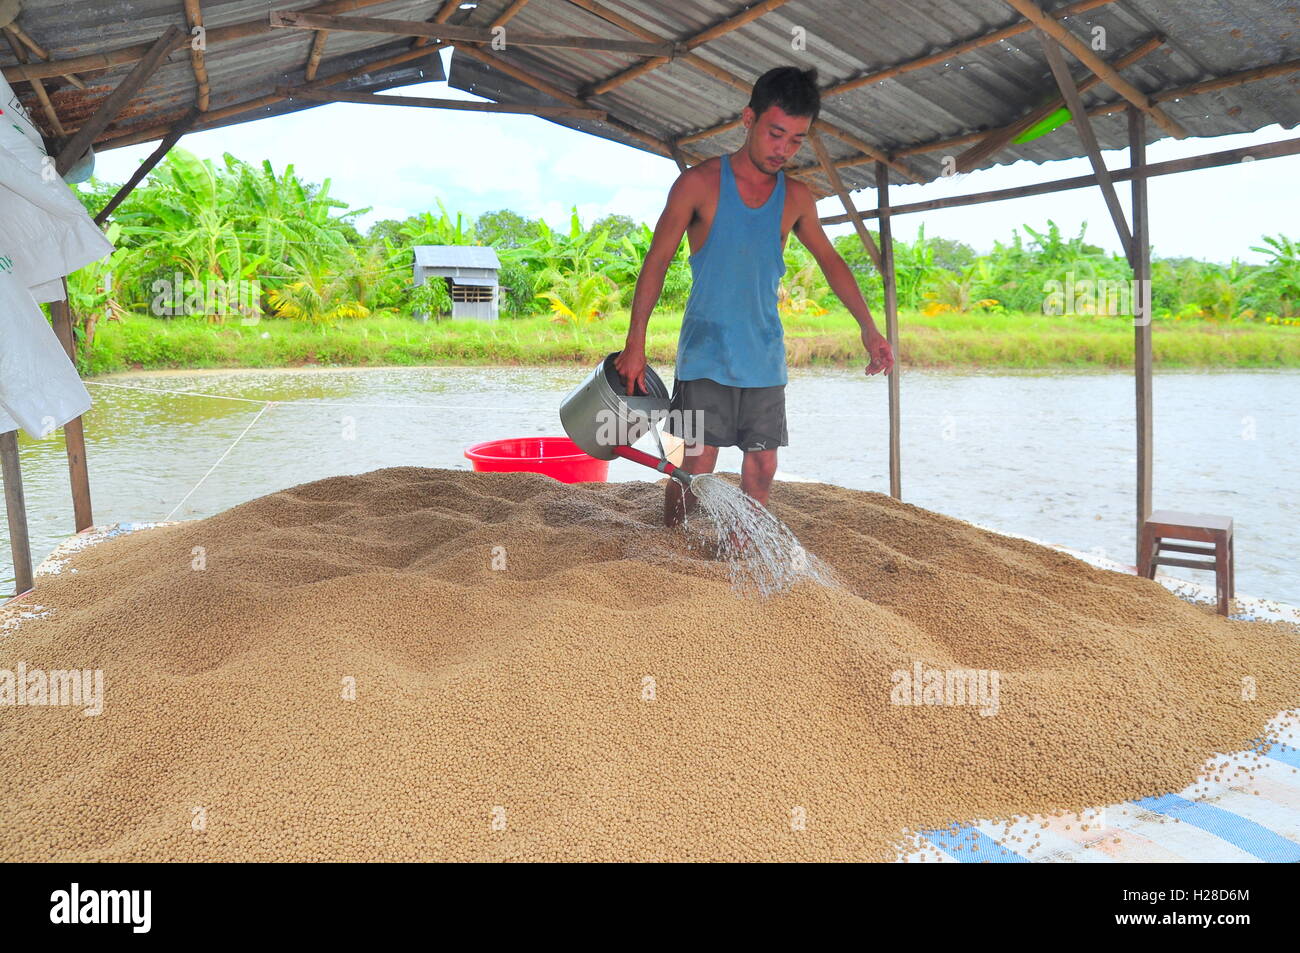 An Giang, Vietnam - August 25, 2011: A farmer is preparing to feed pangasius catfish in his farm pond Stock Photo